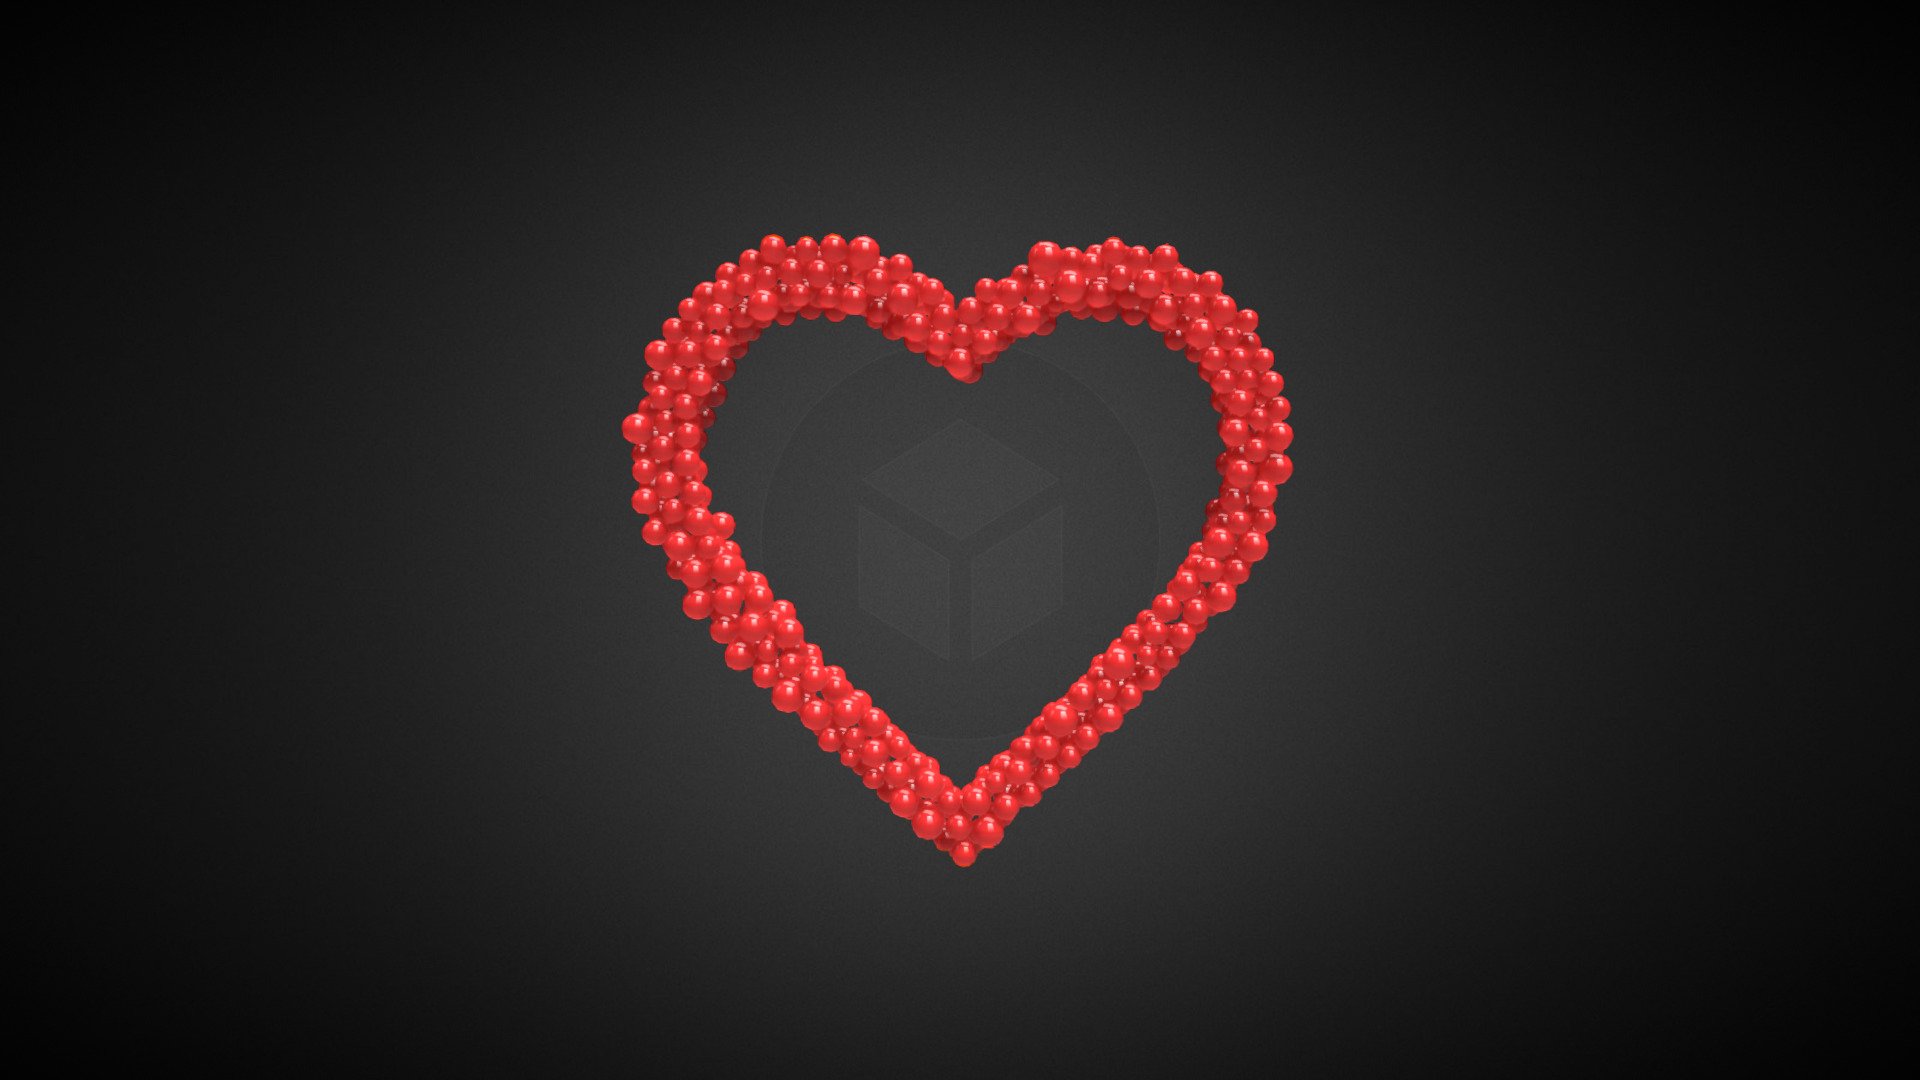 Outline Heart shape - animation from spheres